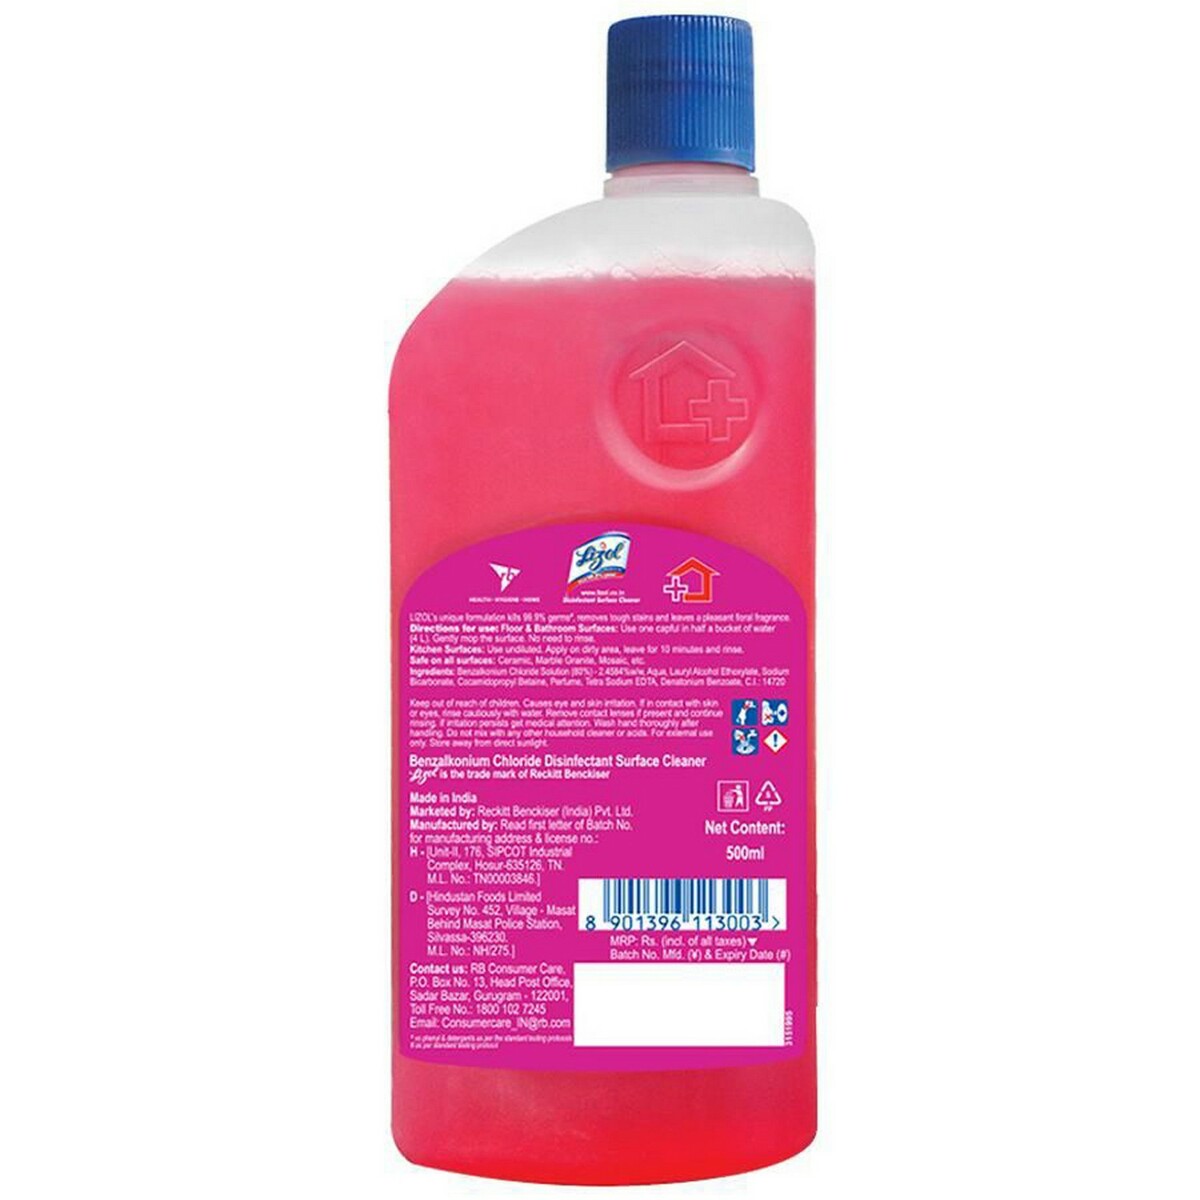 Lizol Disinfectant Surface Cleaner Floral 500ml